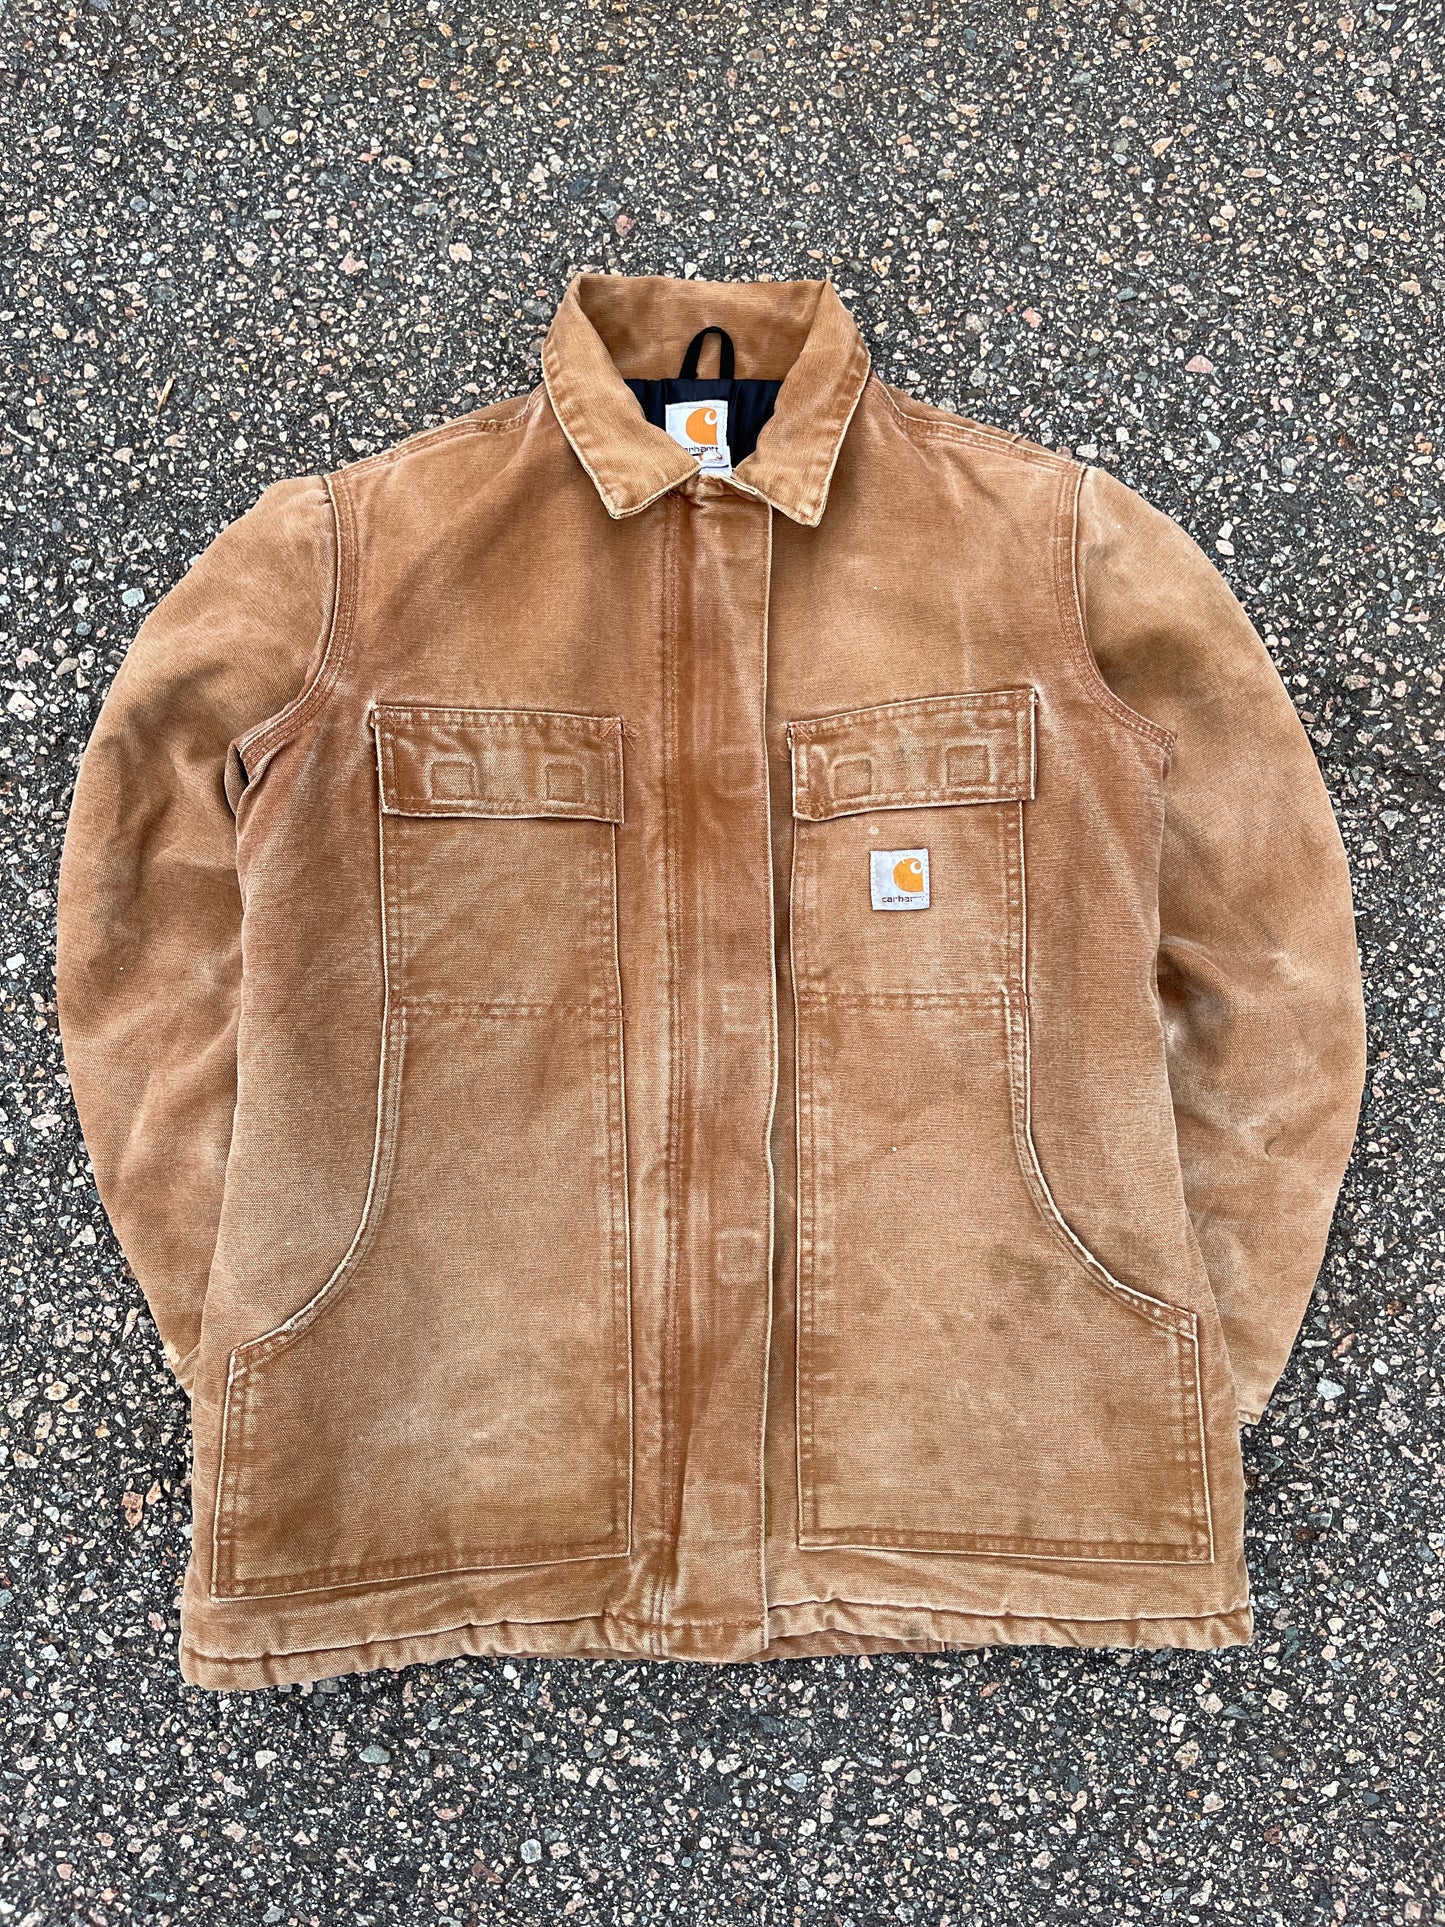 Faded Brown Carhartt Arctic Style Jacket - Small